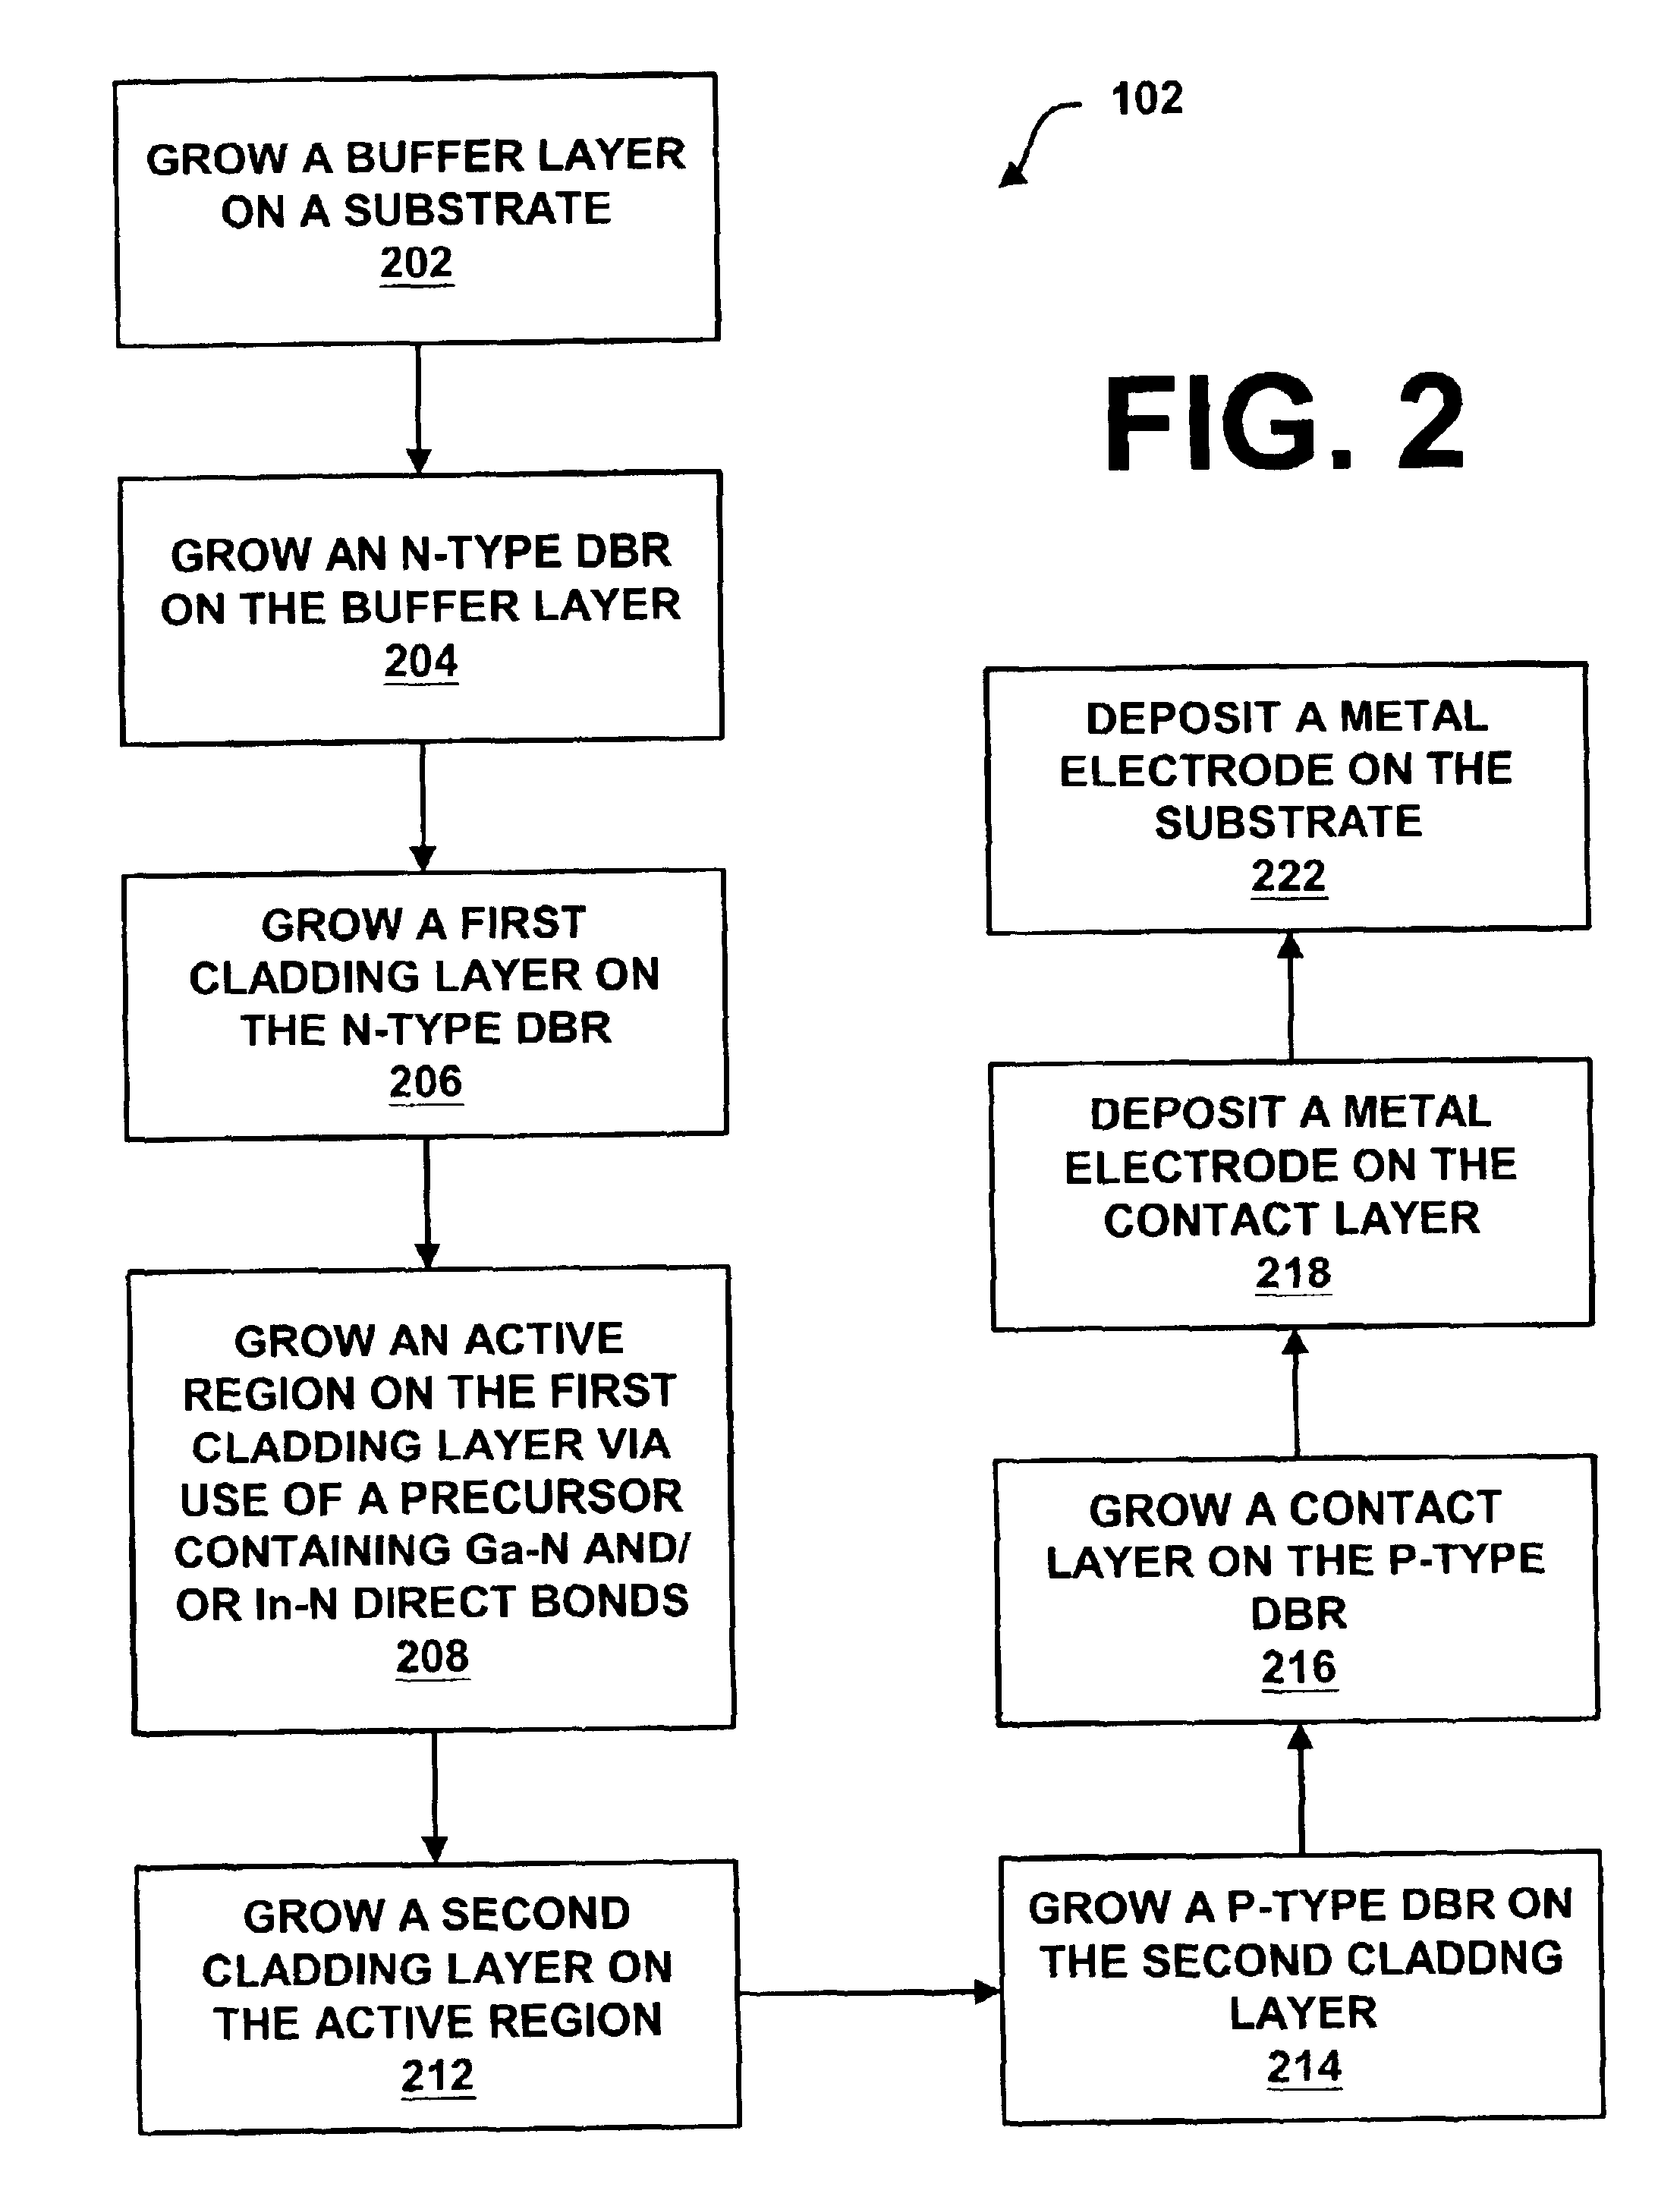 System and method for fabricating efficient semiconductor lasers via use of precursors having a direct bond between a group III atom and a nitrogen atom